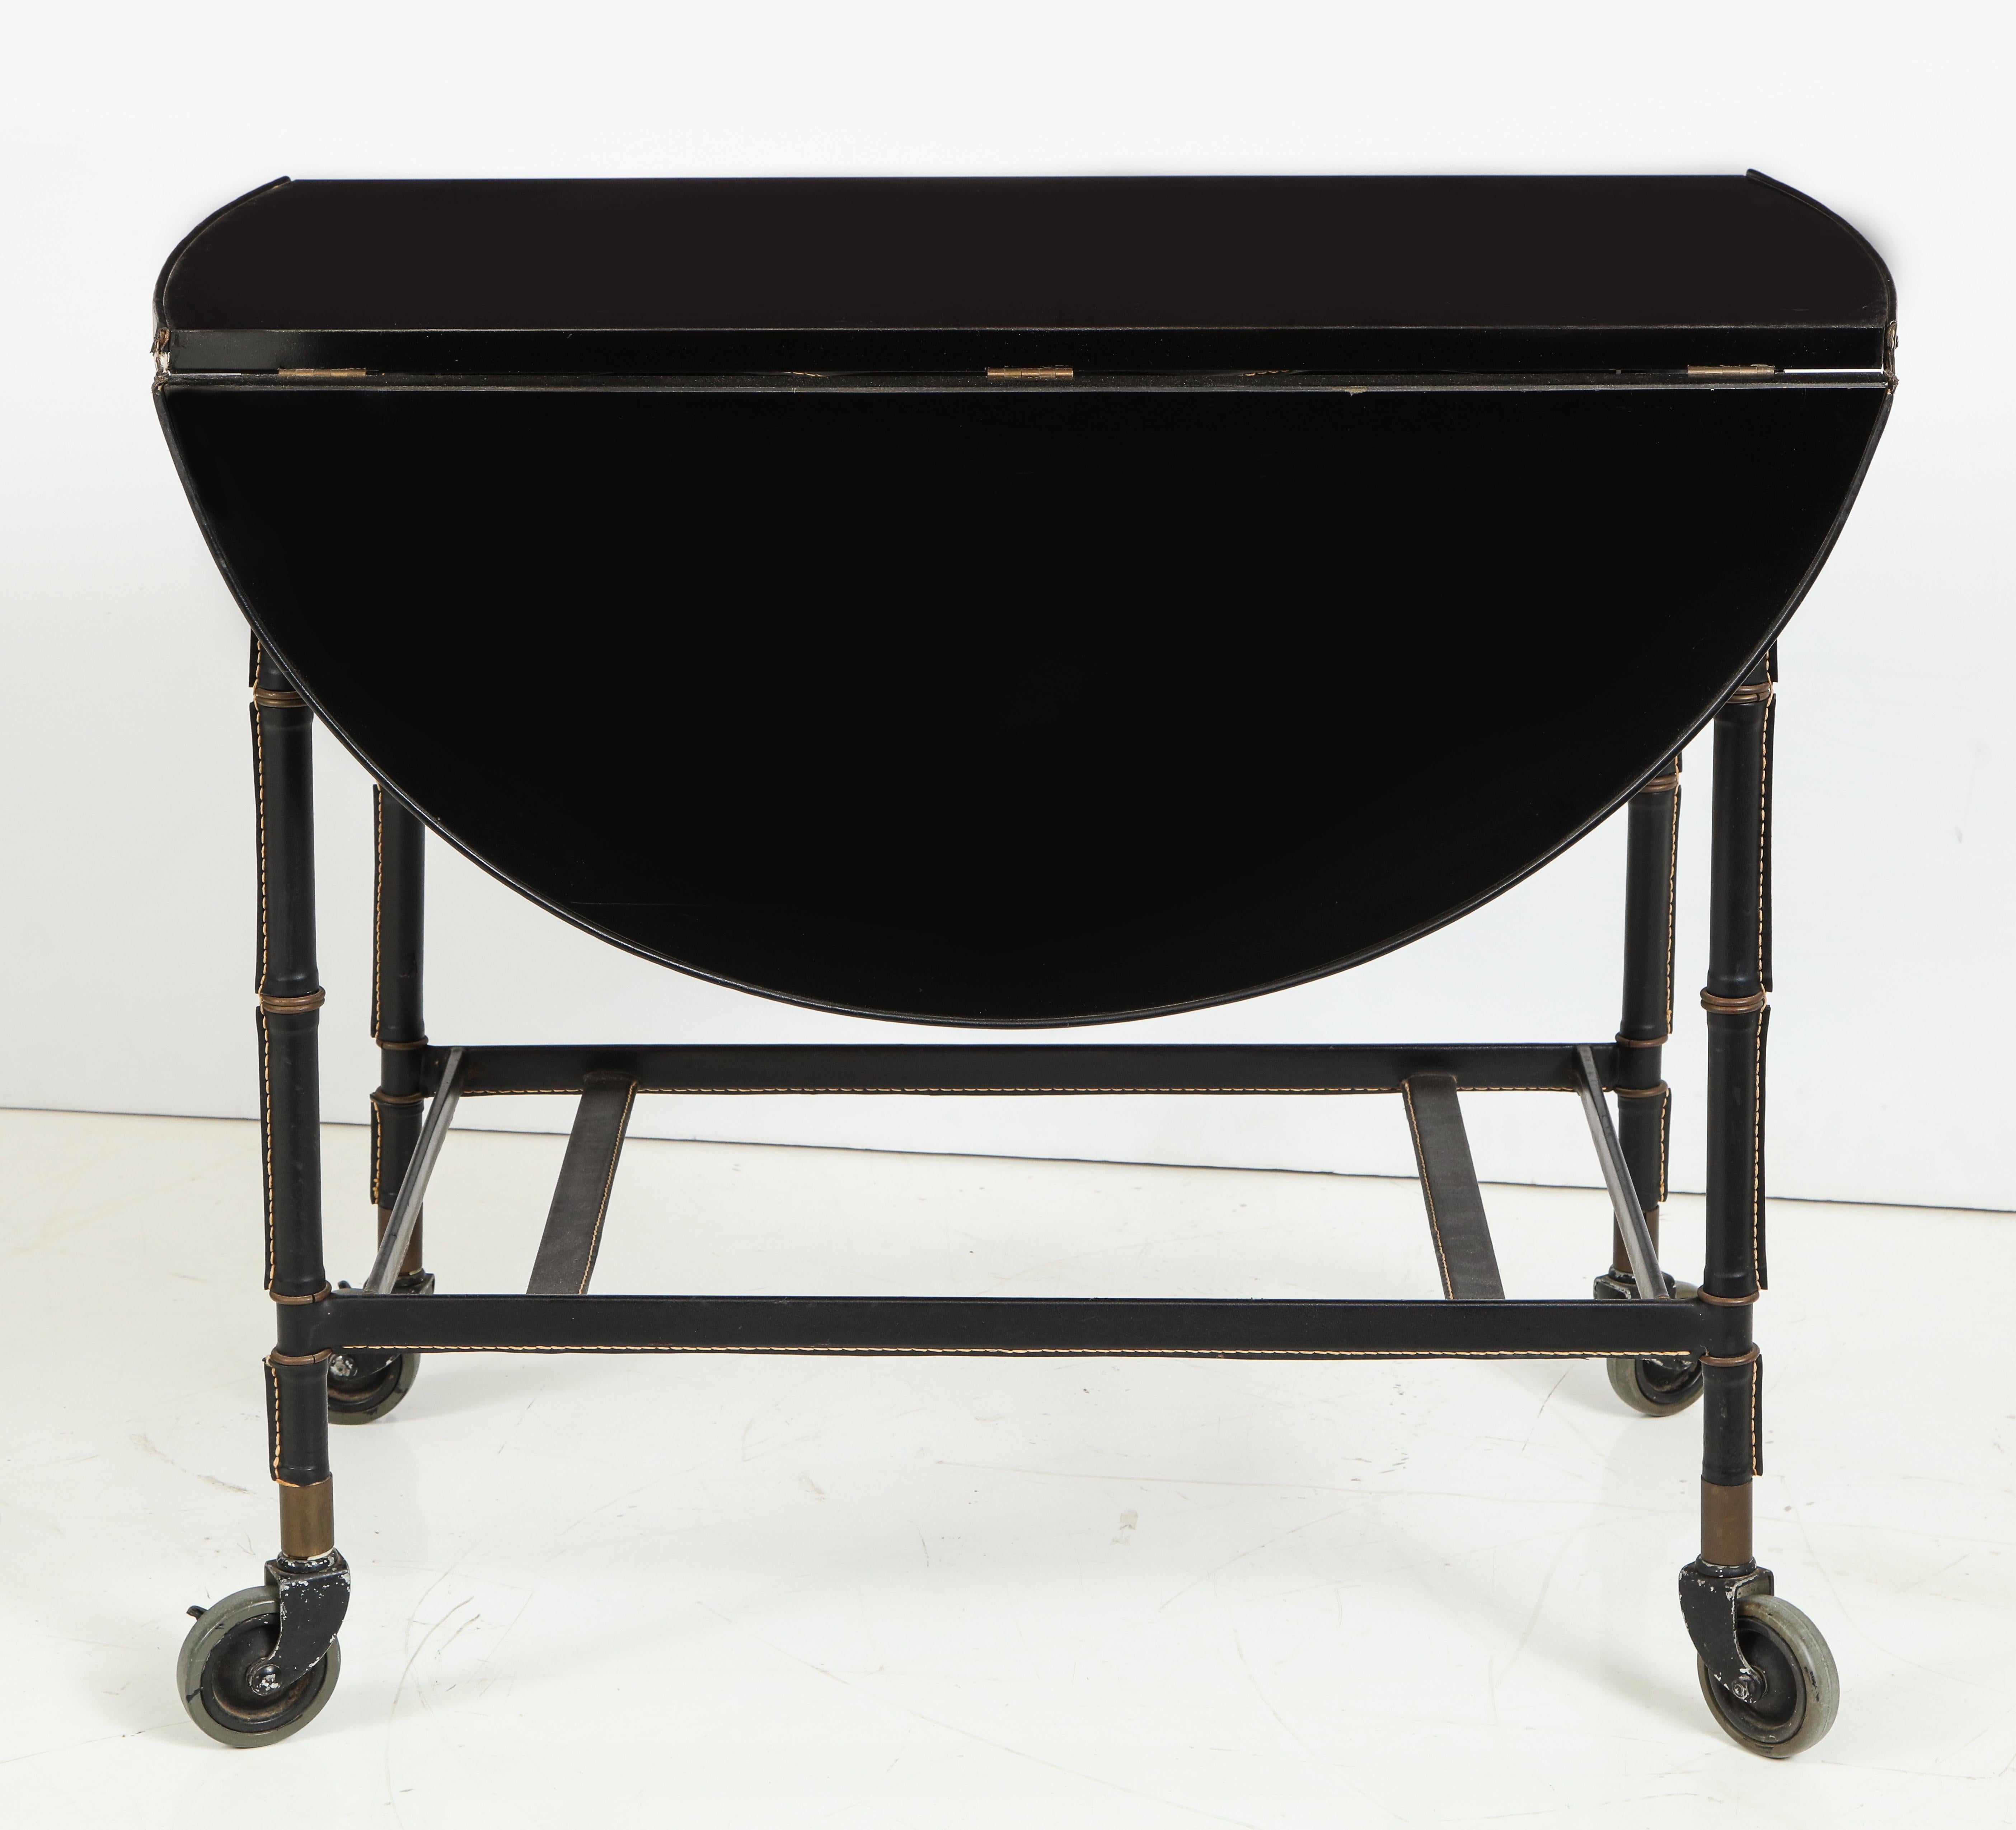 French Jacques Adnet Leather Wrapped Drop-Leaf Serving Table on Casters, France, 1950s